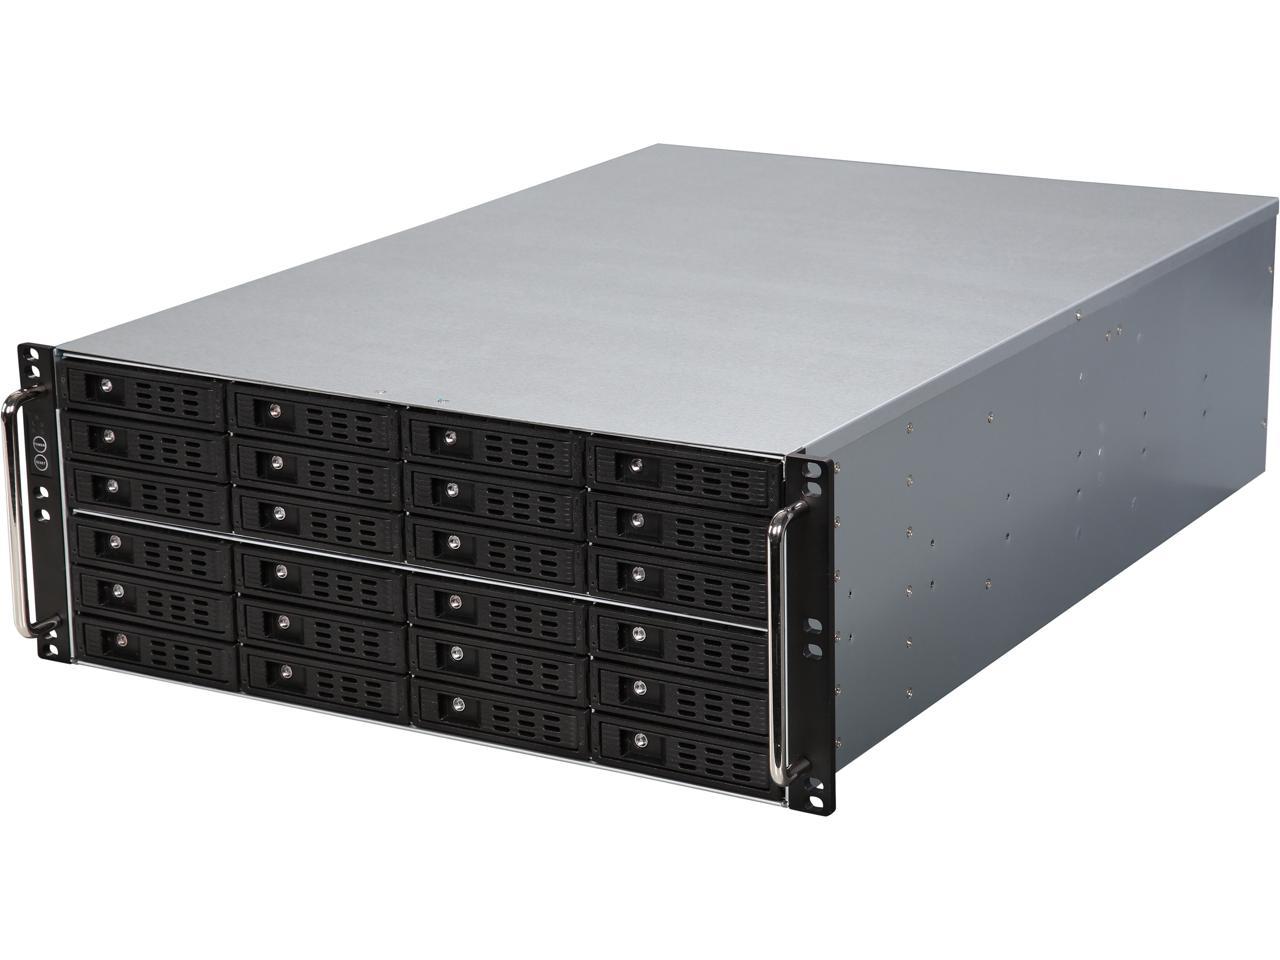 Athena Power RM-4U4243HE12 12Gb/s 4U Hot-Swap 24-Bay E-ATX Rackmount Server Chassis w/ 12 Gbps Mini-SAS Backplane Supports 24 x 3.5" or 2.5" SAS / SATA SSD / HDD - Support E-ATX (12" x 13") M/B - Supp - OEM